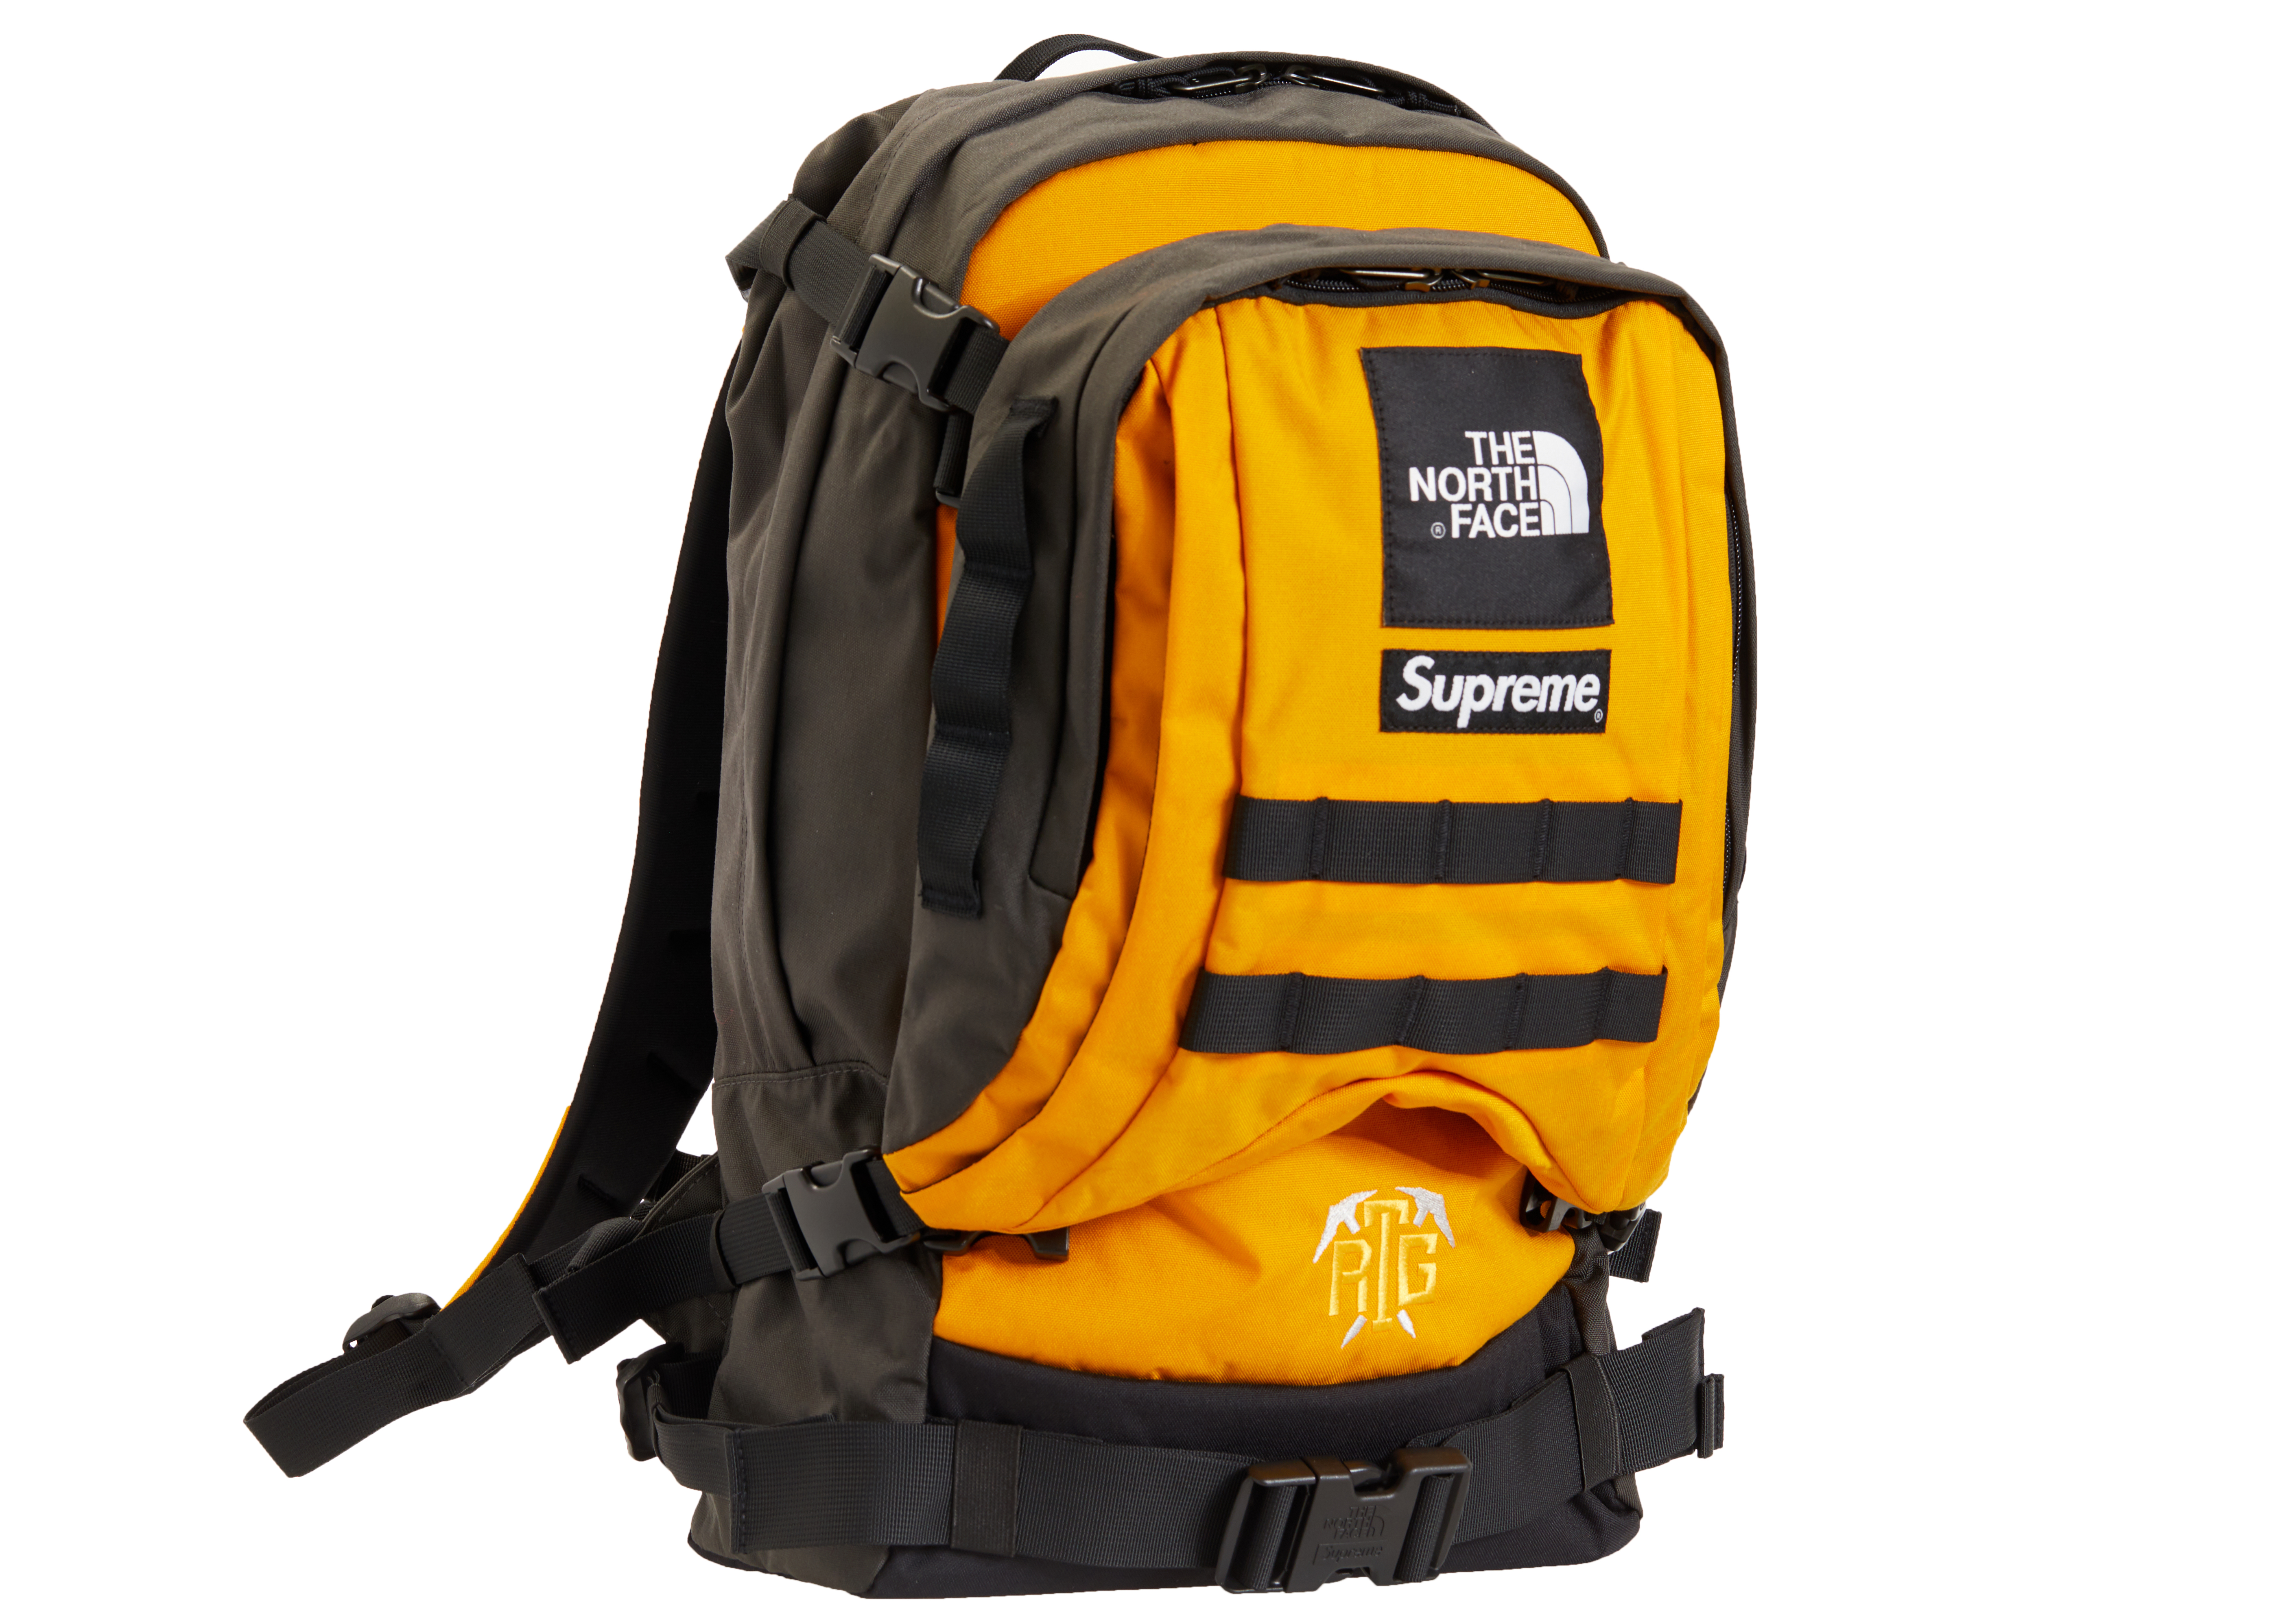 Supreme North Face Backpack Hotsell, 50% OFF | www.ingeniovirtual.com